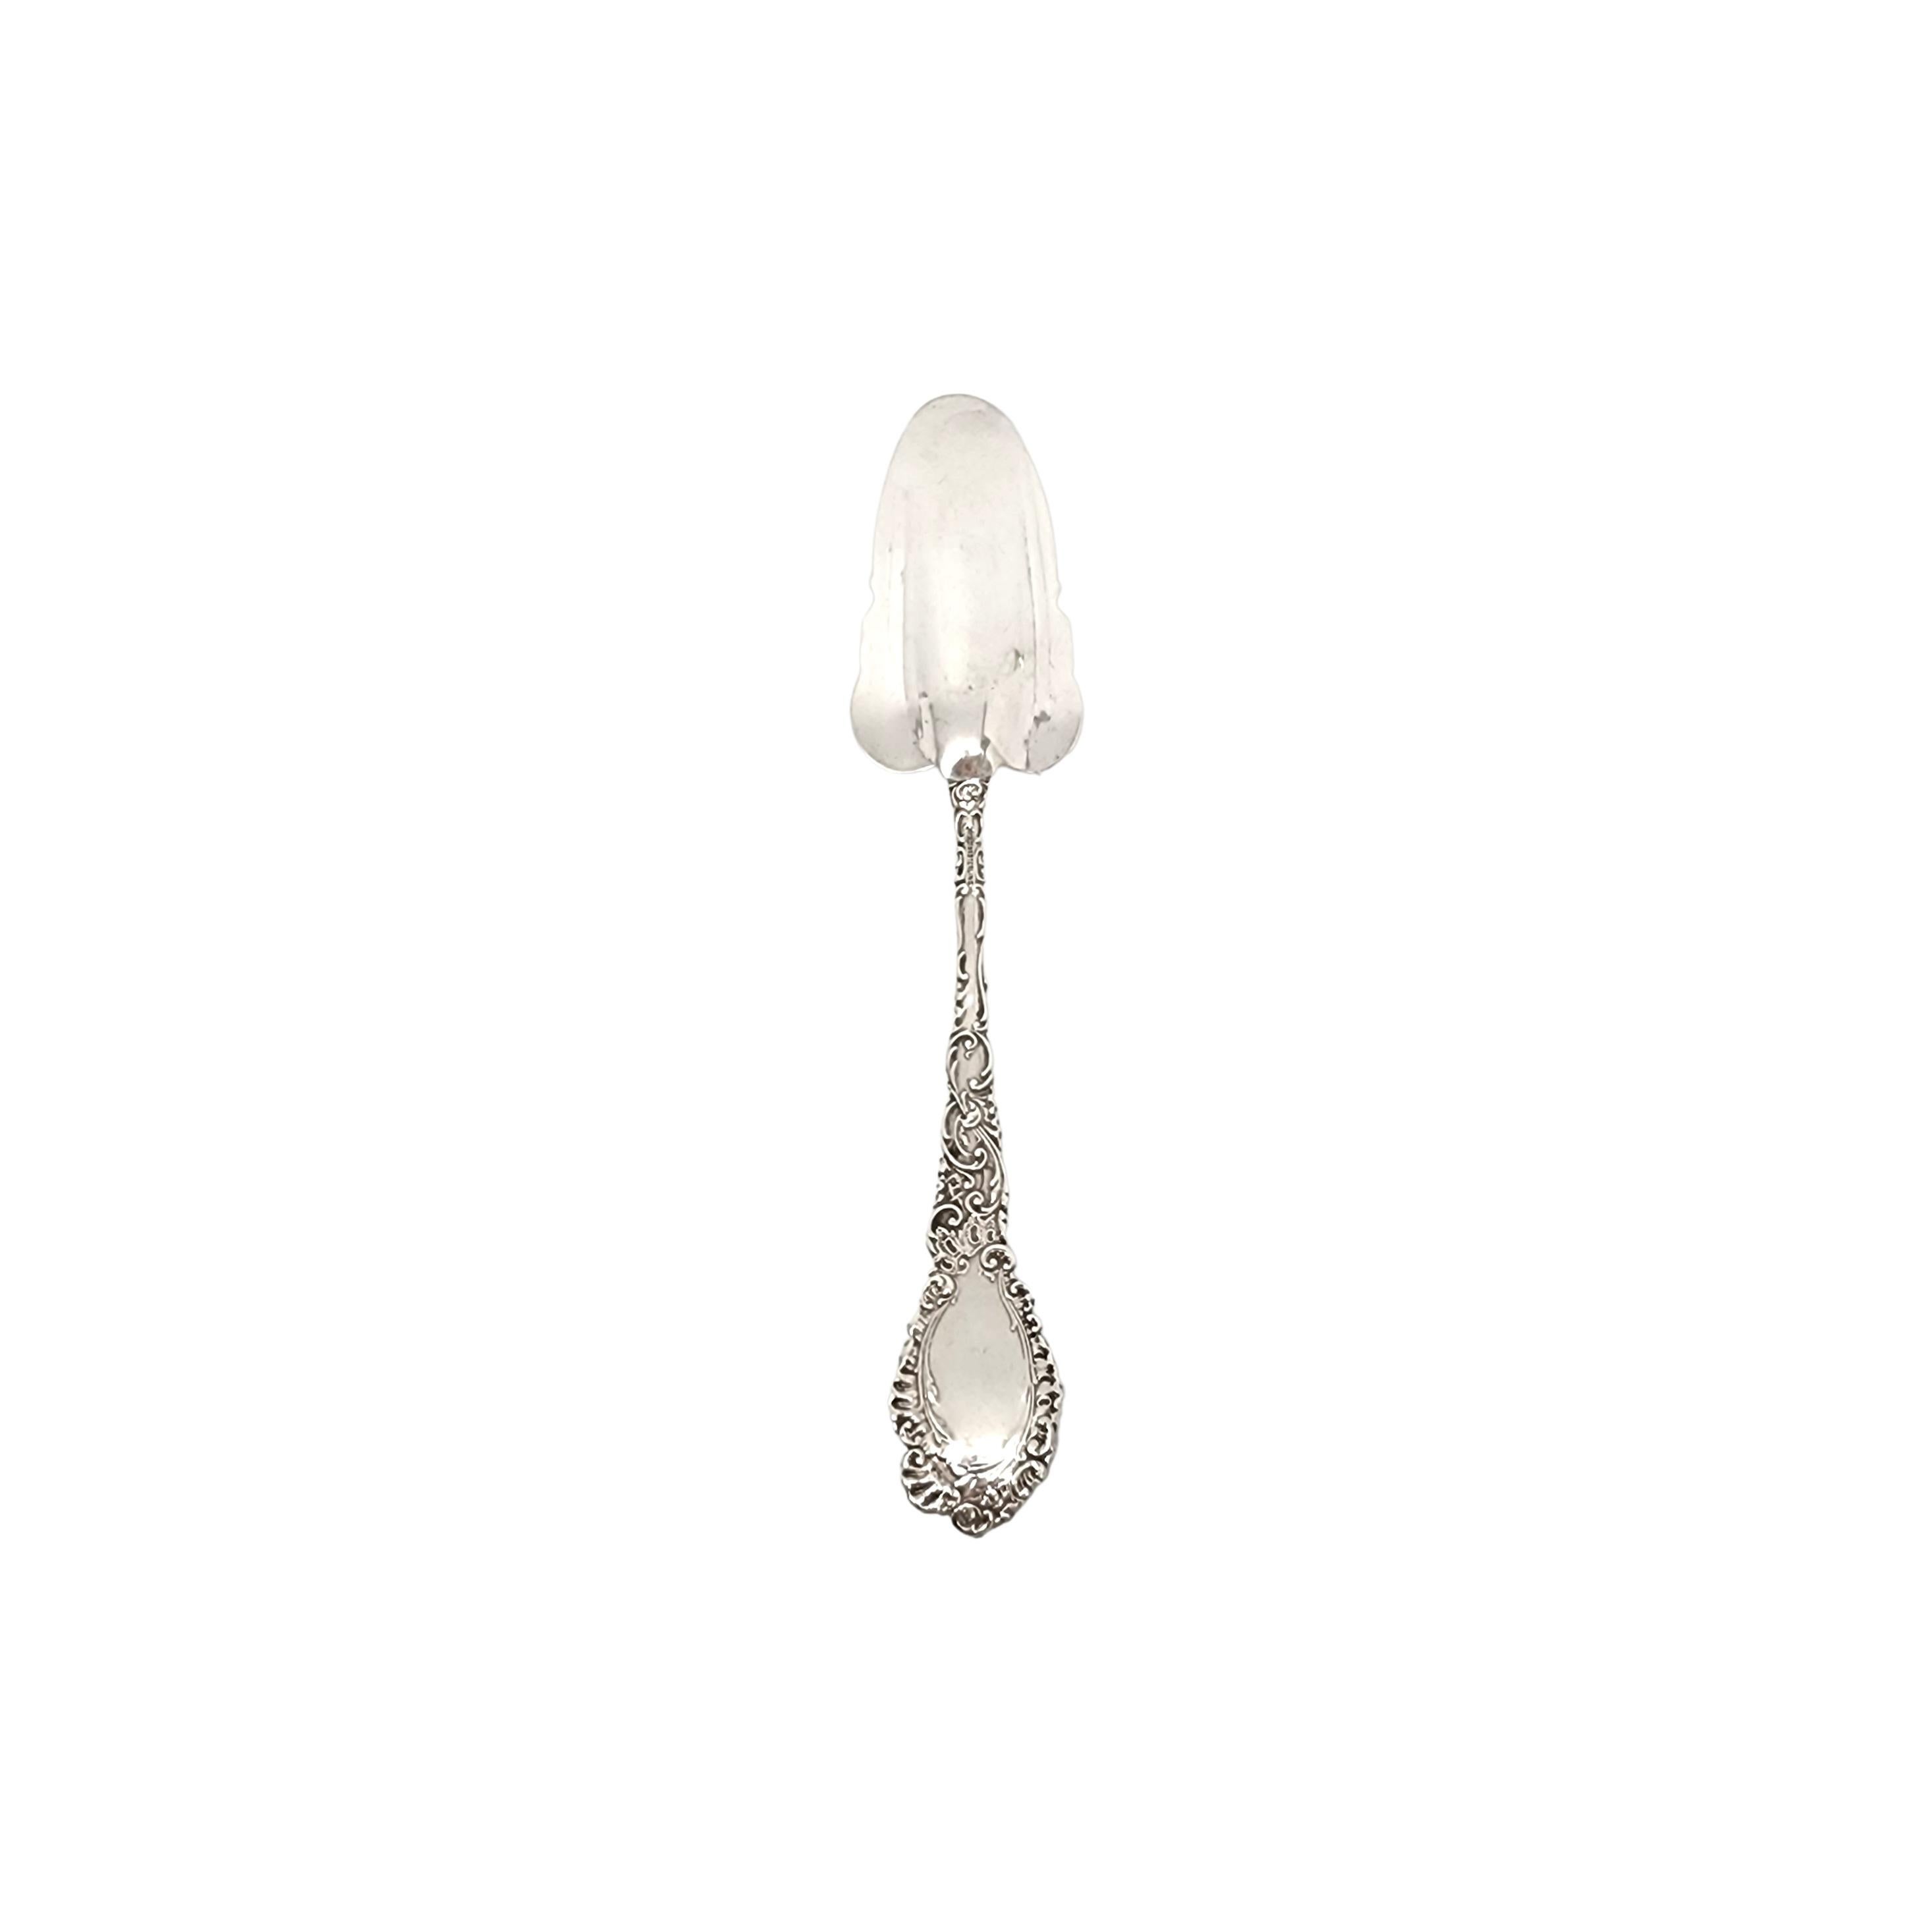 R Wallace & Sons Sterling Silver Louvre Jelly/Cake Server with Monogram For Sale 3